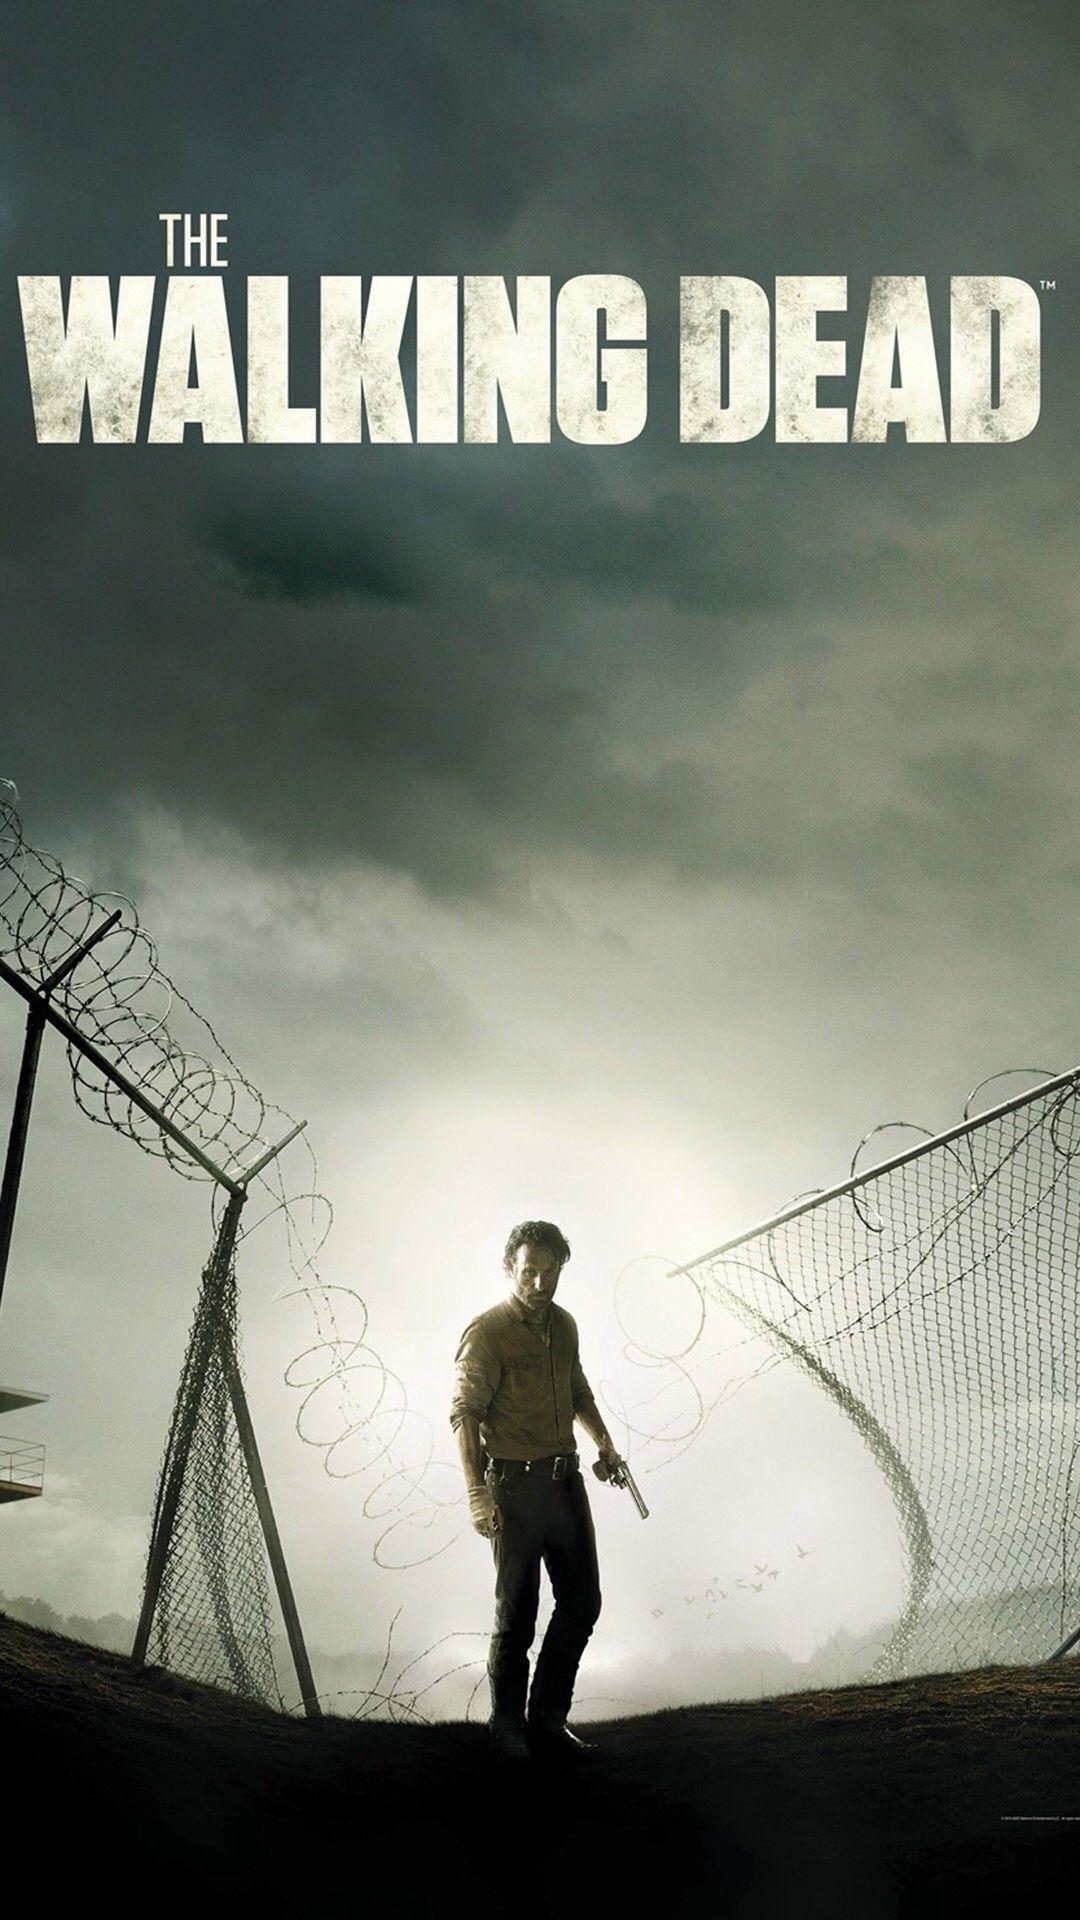 The Walking Dead Iphone Wallpapers Top Free The Walking Dead Iphone Backgrounds Wallpaperaccess